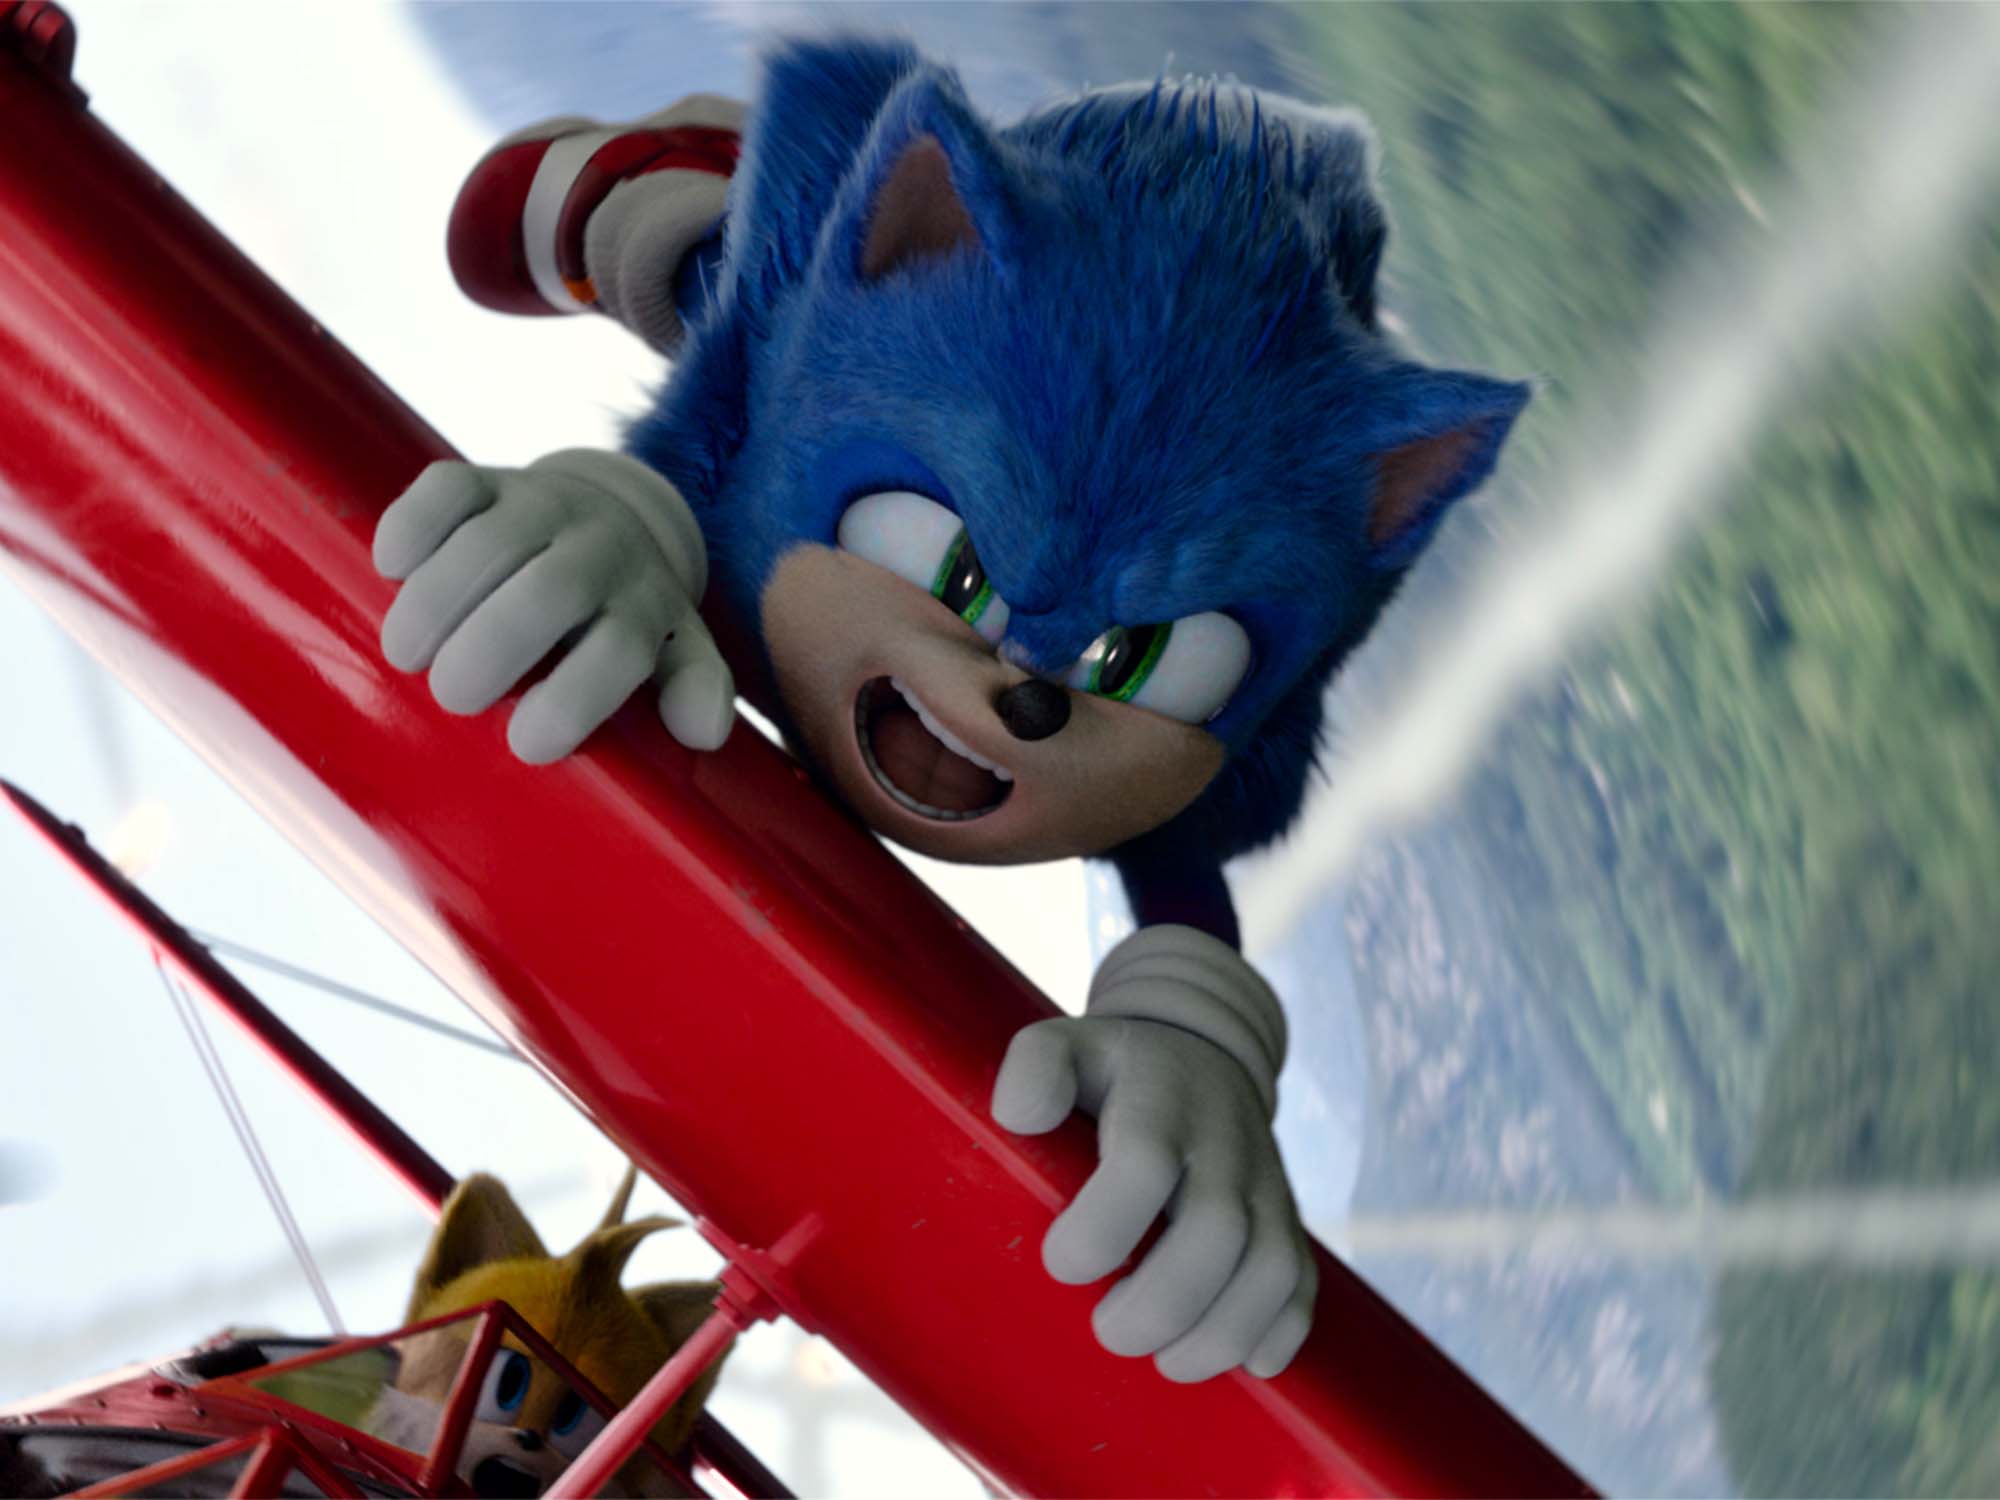 Is 'Sonic The Hedgehog 2' Proving That Video Game Movies Are